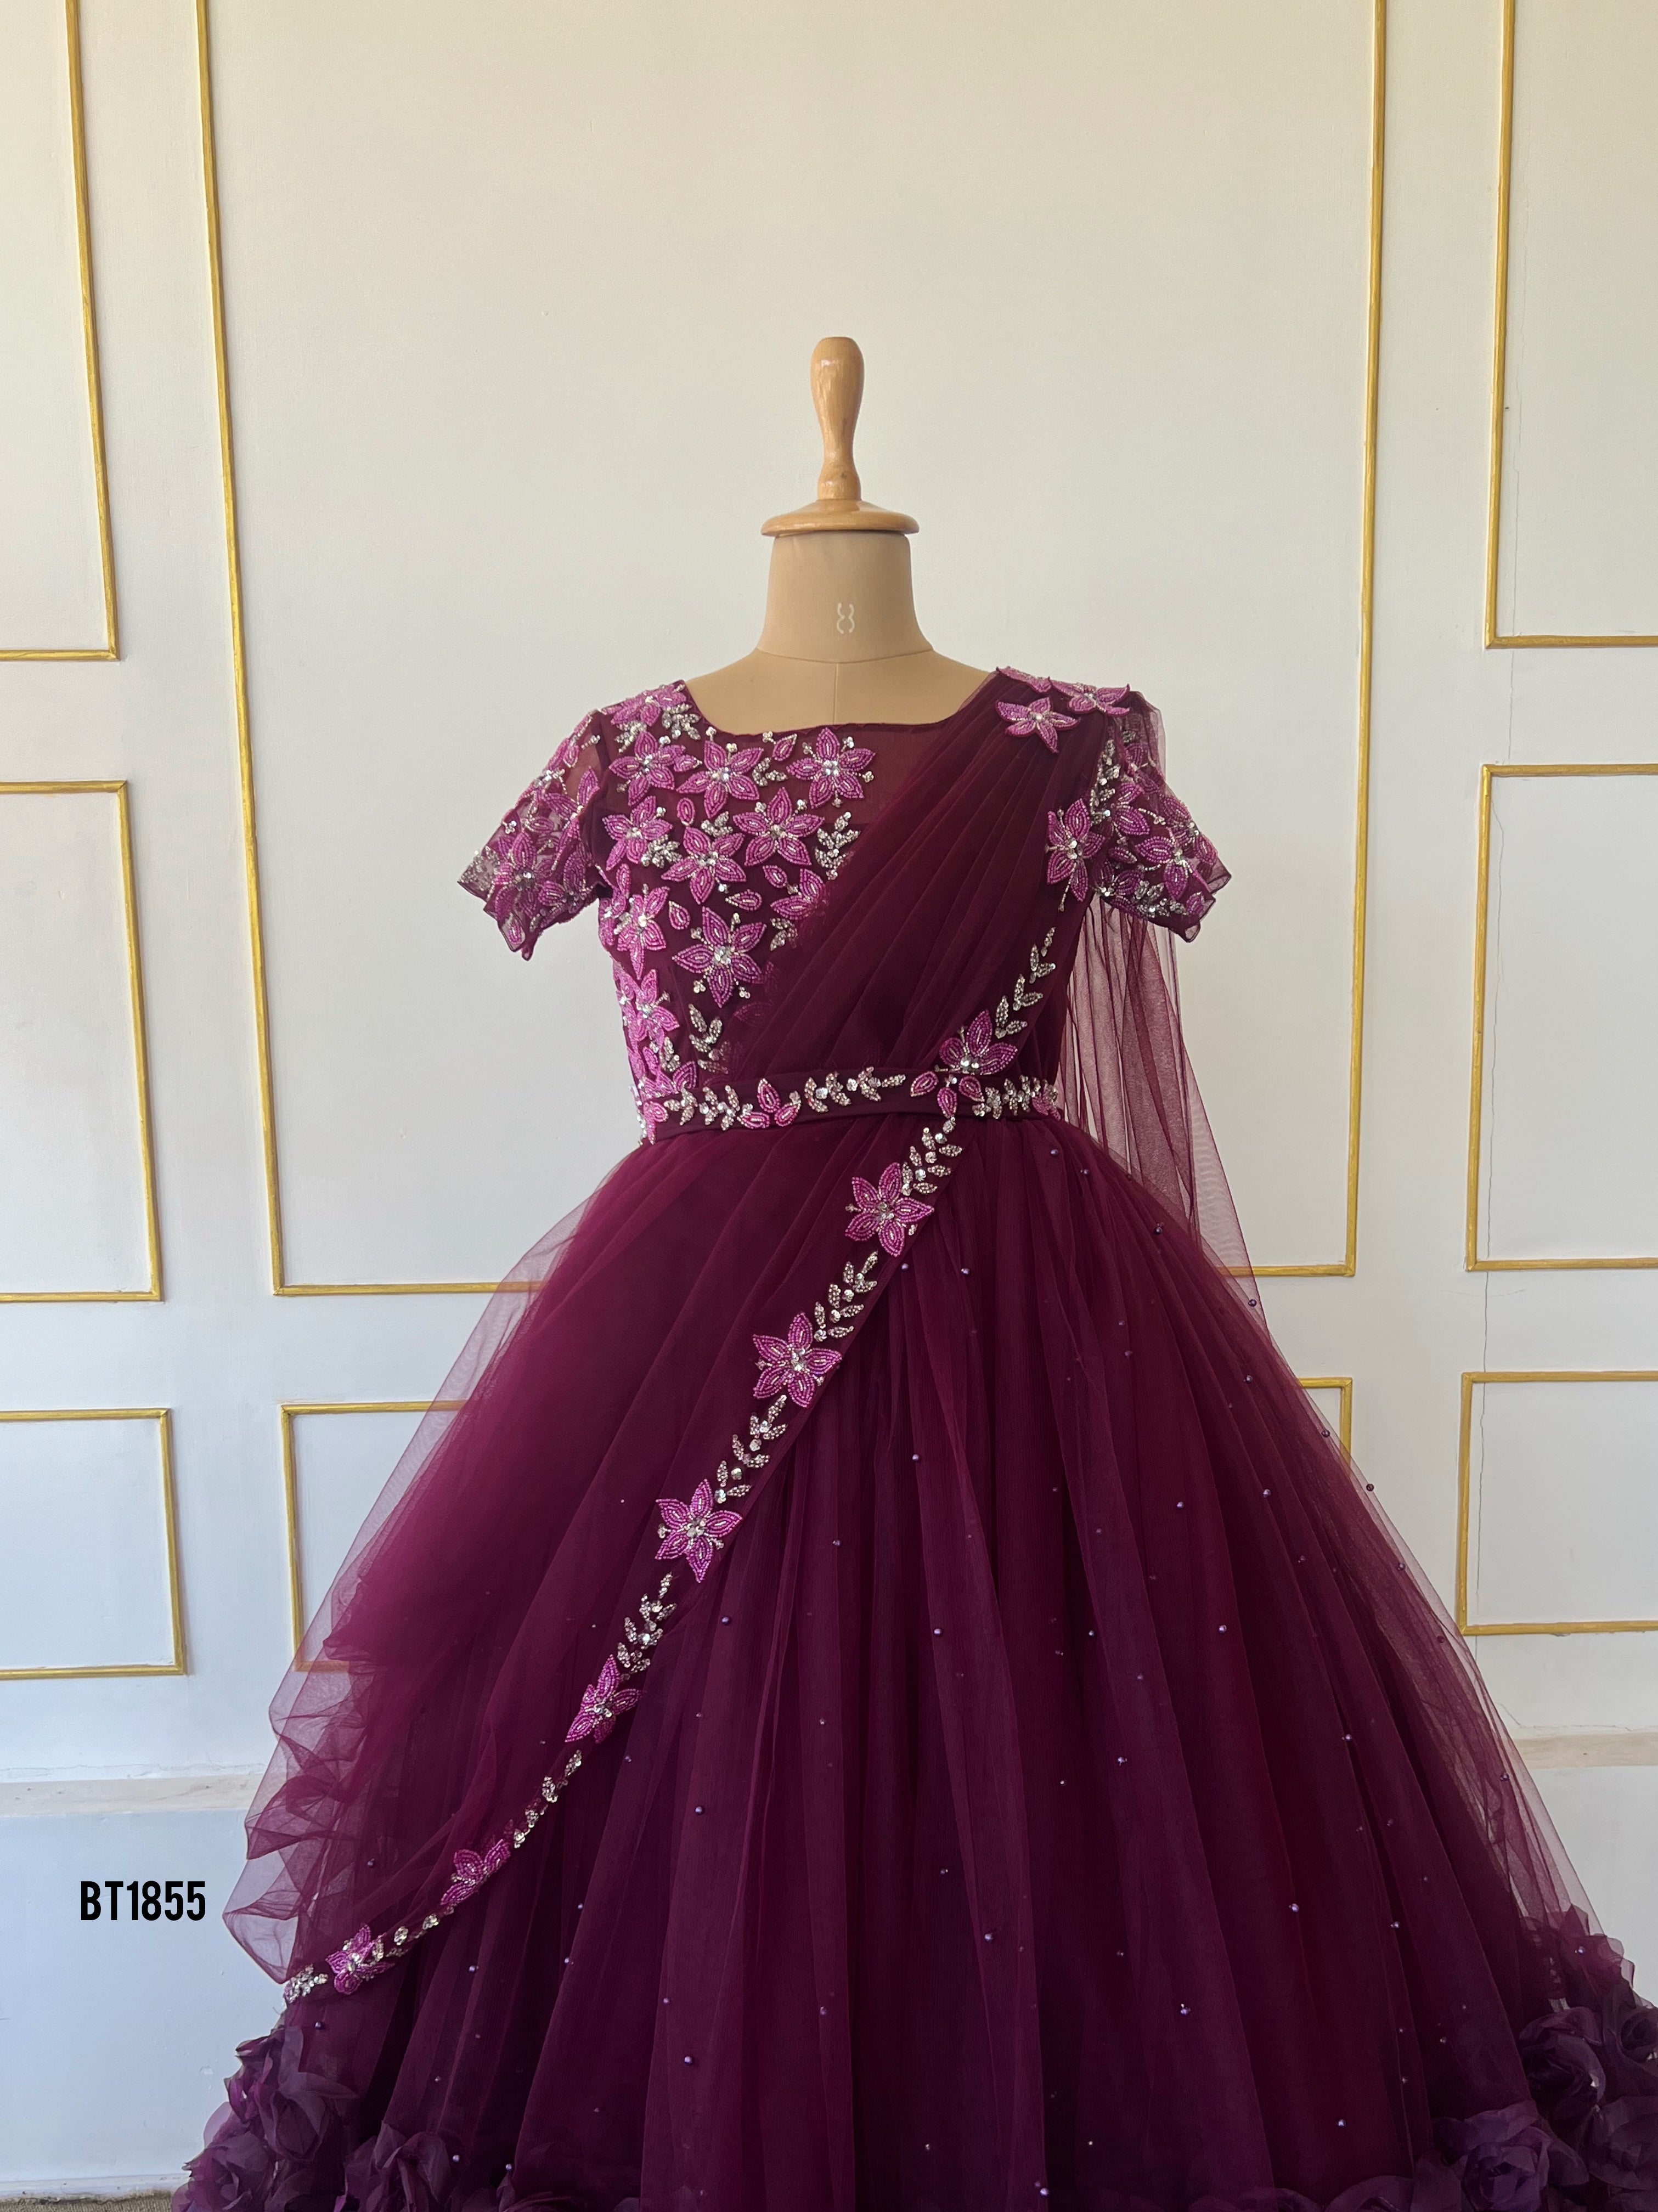 BT1855 Majestic Mauve Mommy & Me Gowns - Elegance for Two!